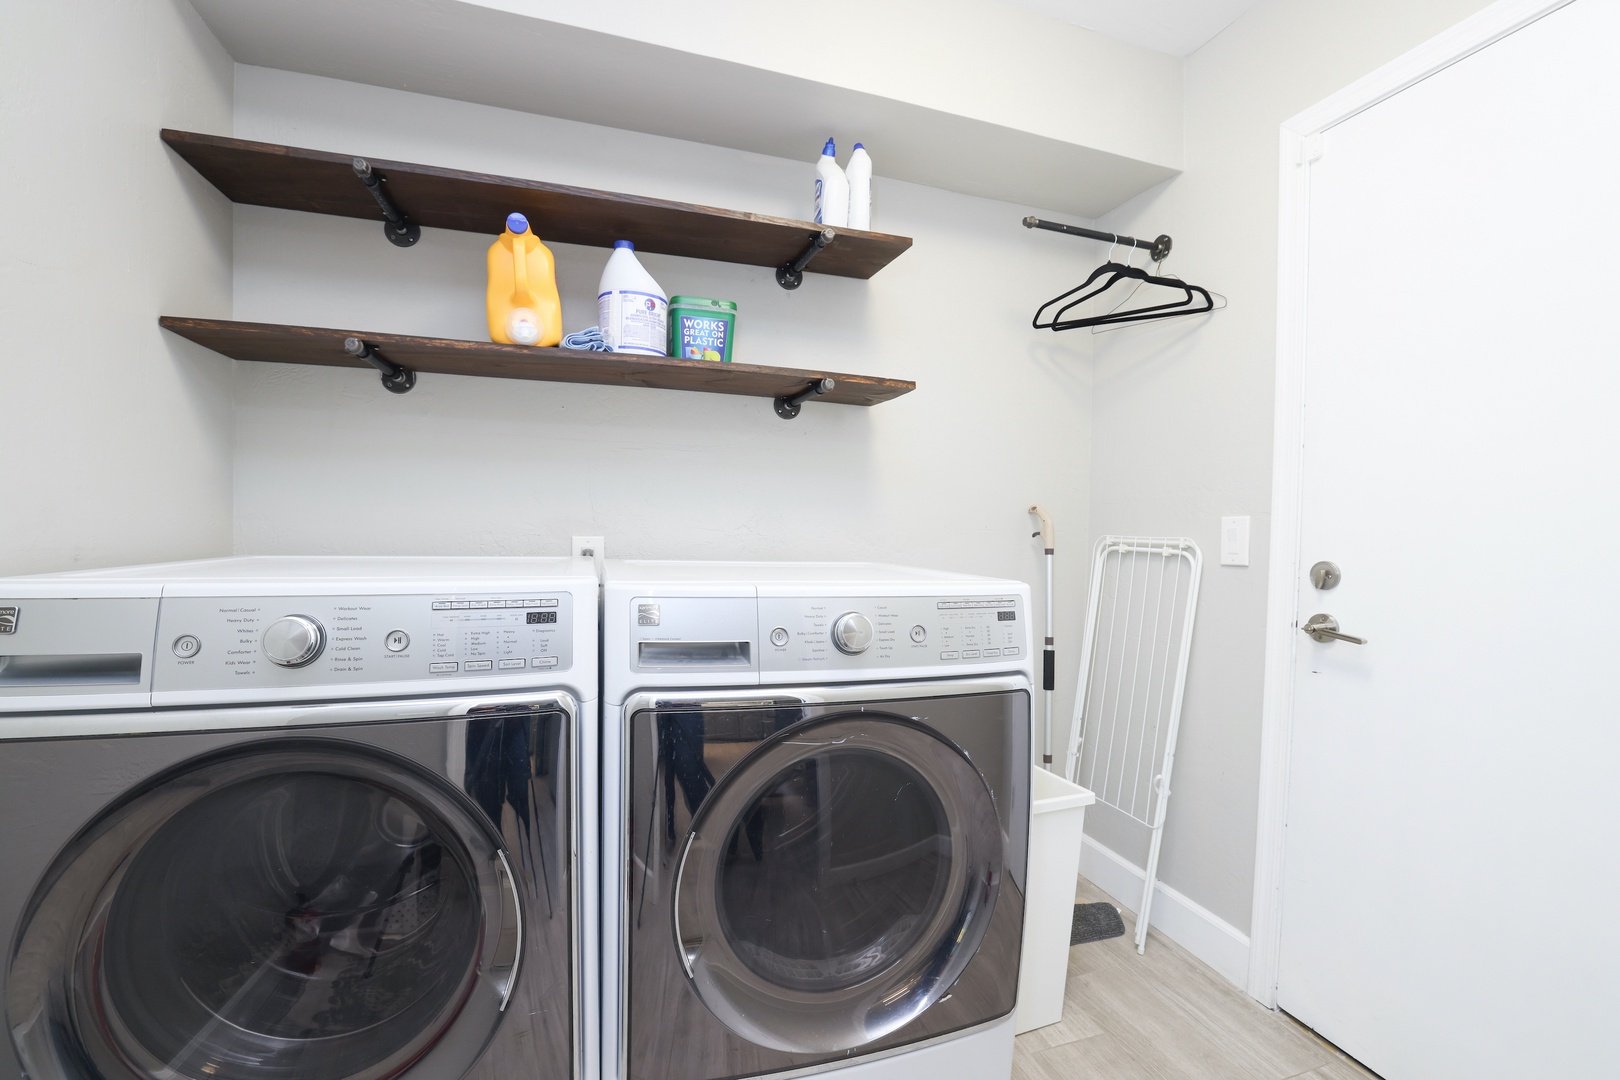 Washer and Dryer are available. Complimentary detergent.